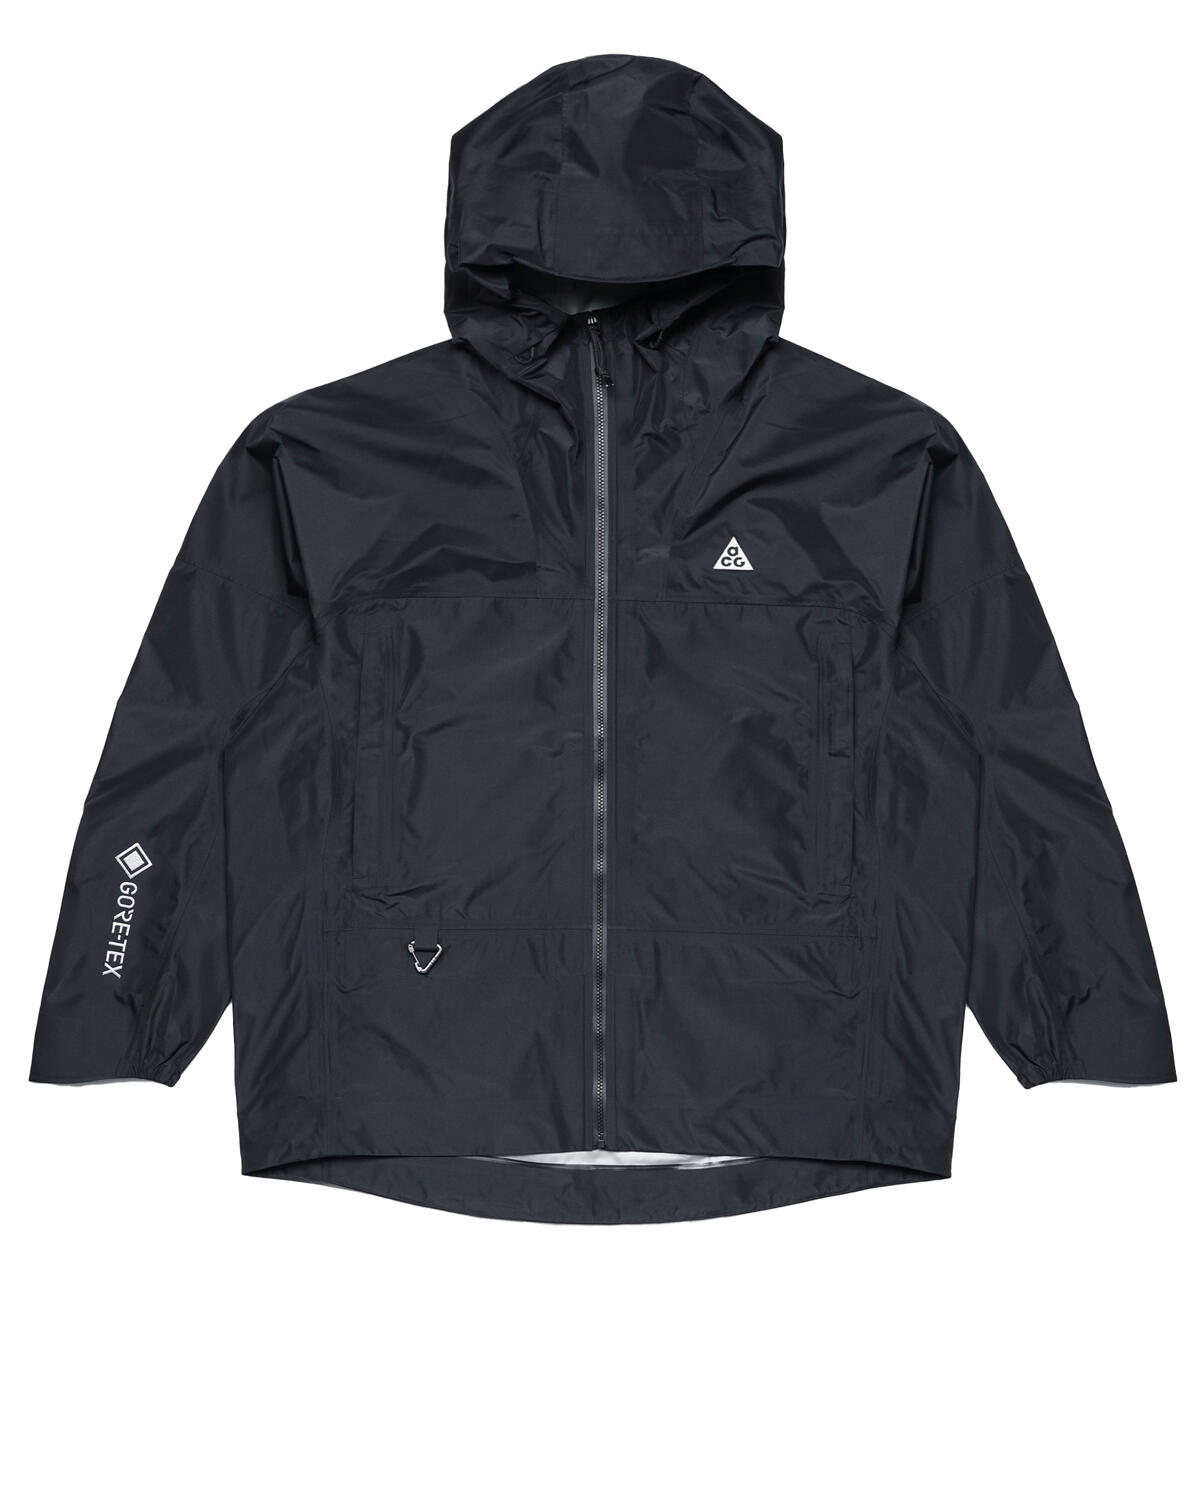 Nike Storm-FIT ADV ACG Jacket 'Chain of Craters' | DB3559-011